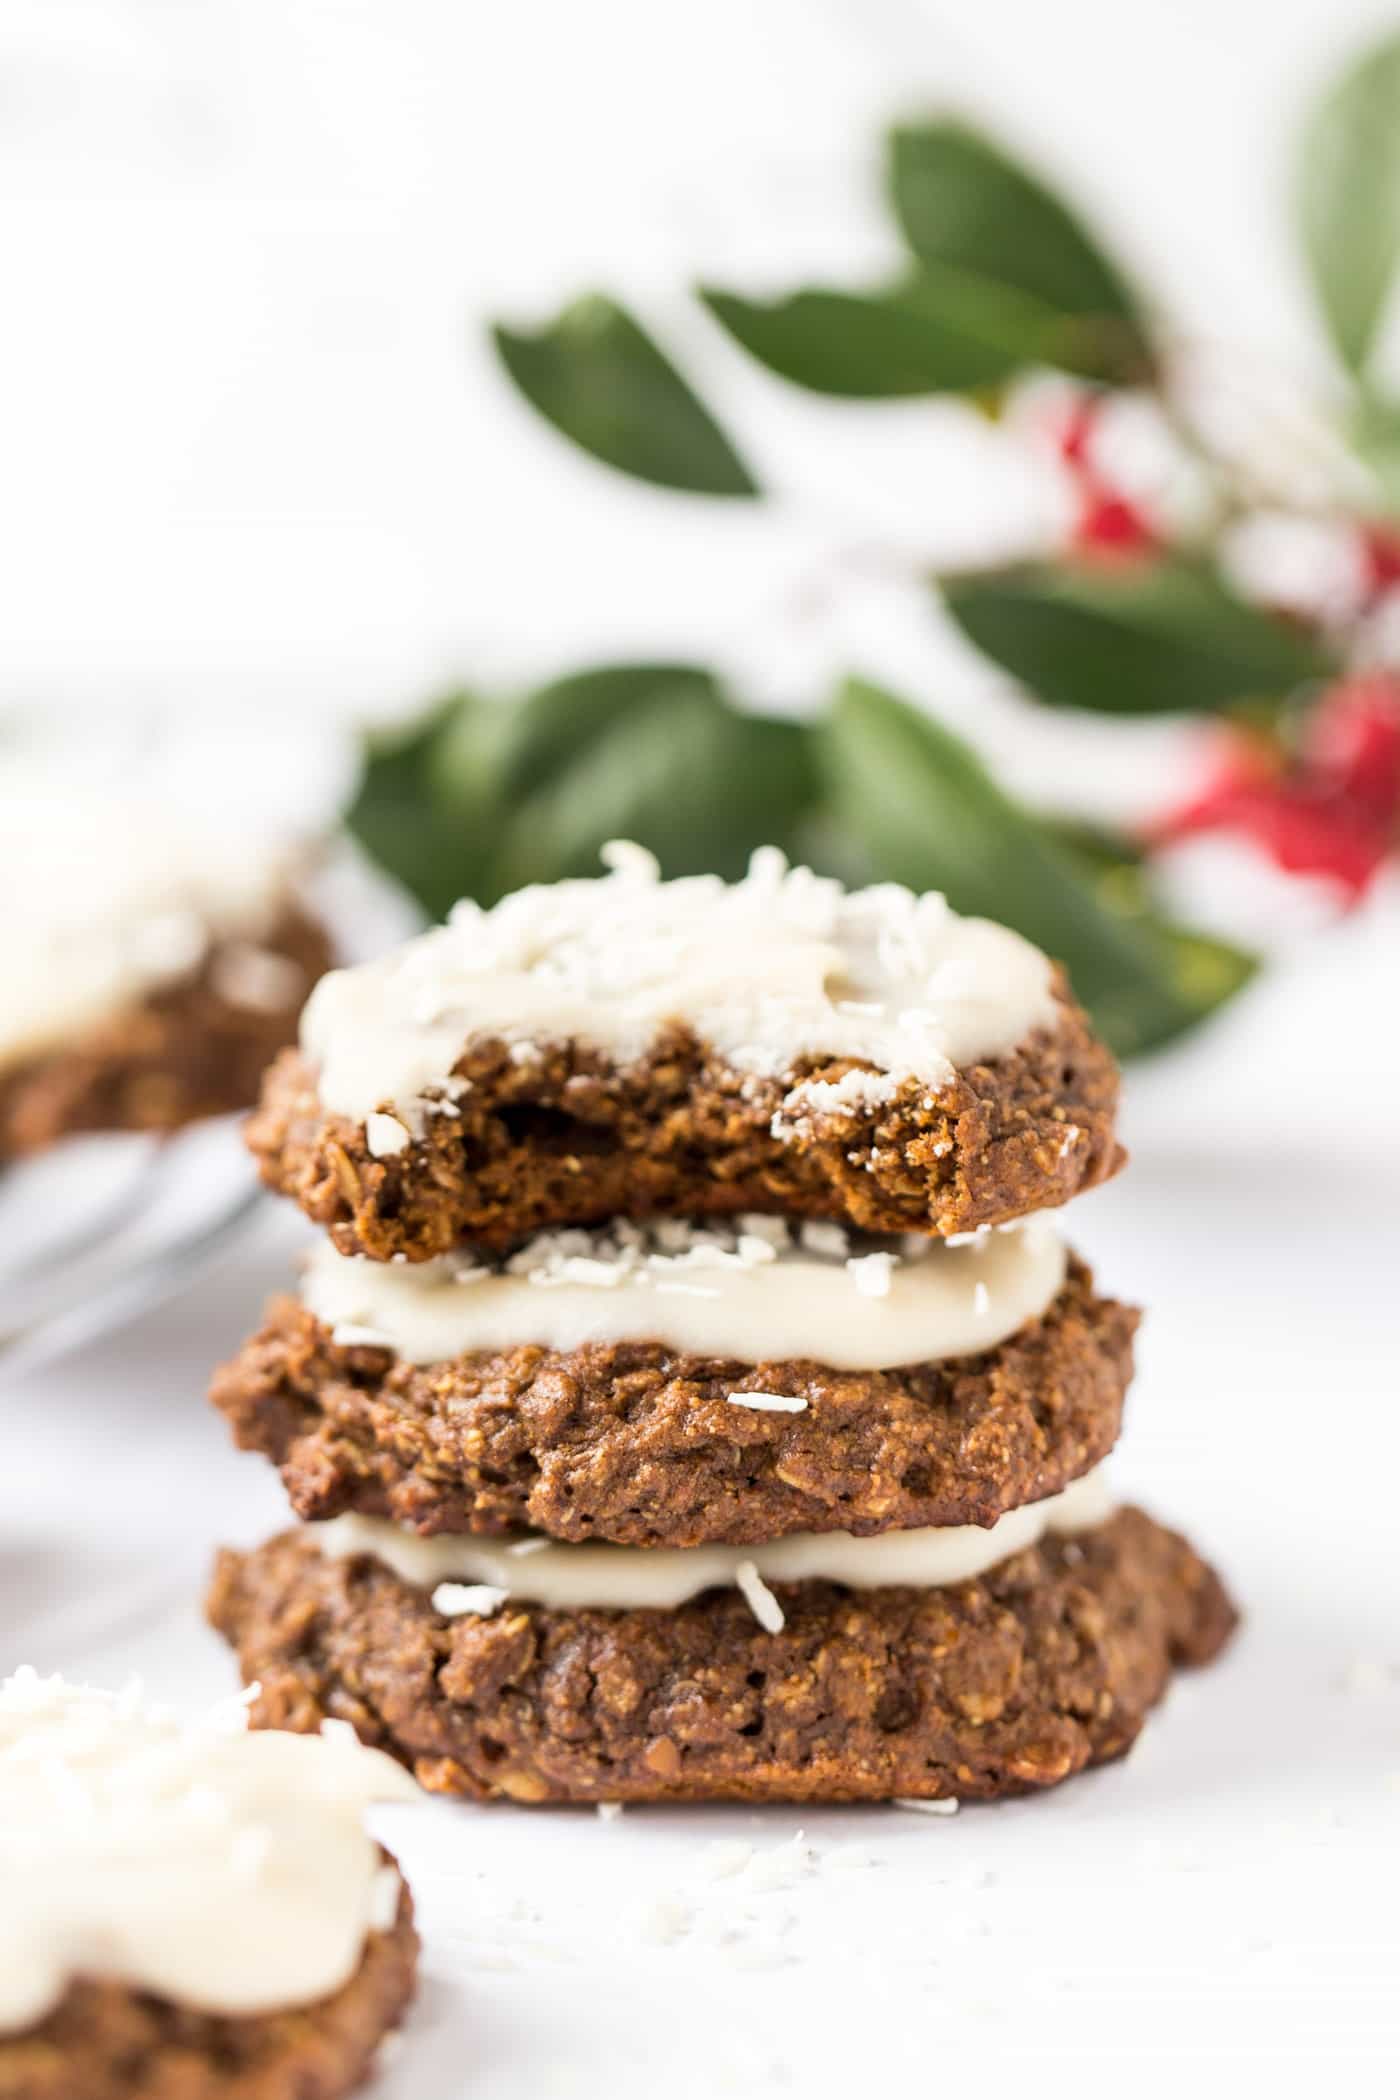 These are THE PERFECT breakfast >> Gingerbread Quinoa Breakfast Cookies with a vegan coconut butter frosting!